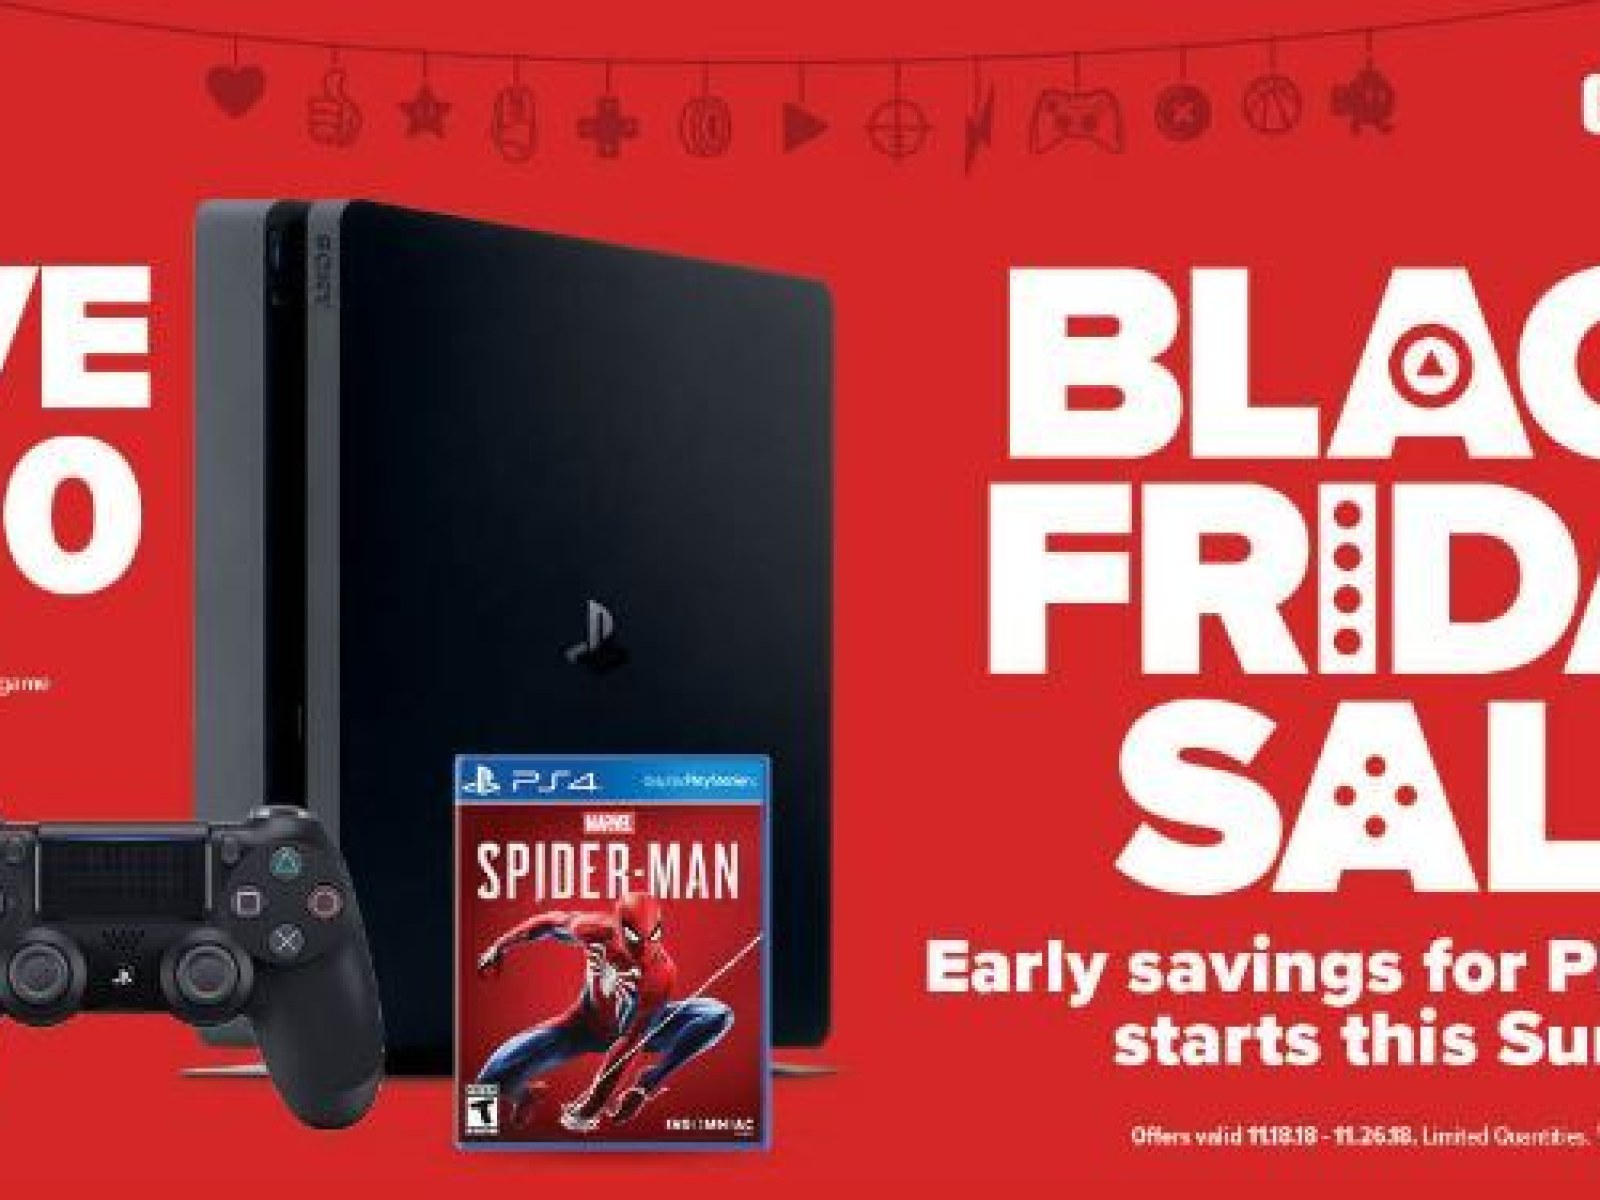 GameStop Black Friday 2018 Deals: Start Saving Early on Xbox and PS4